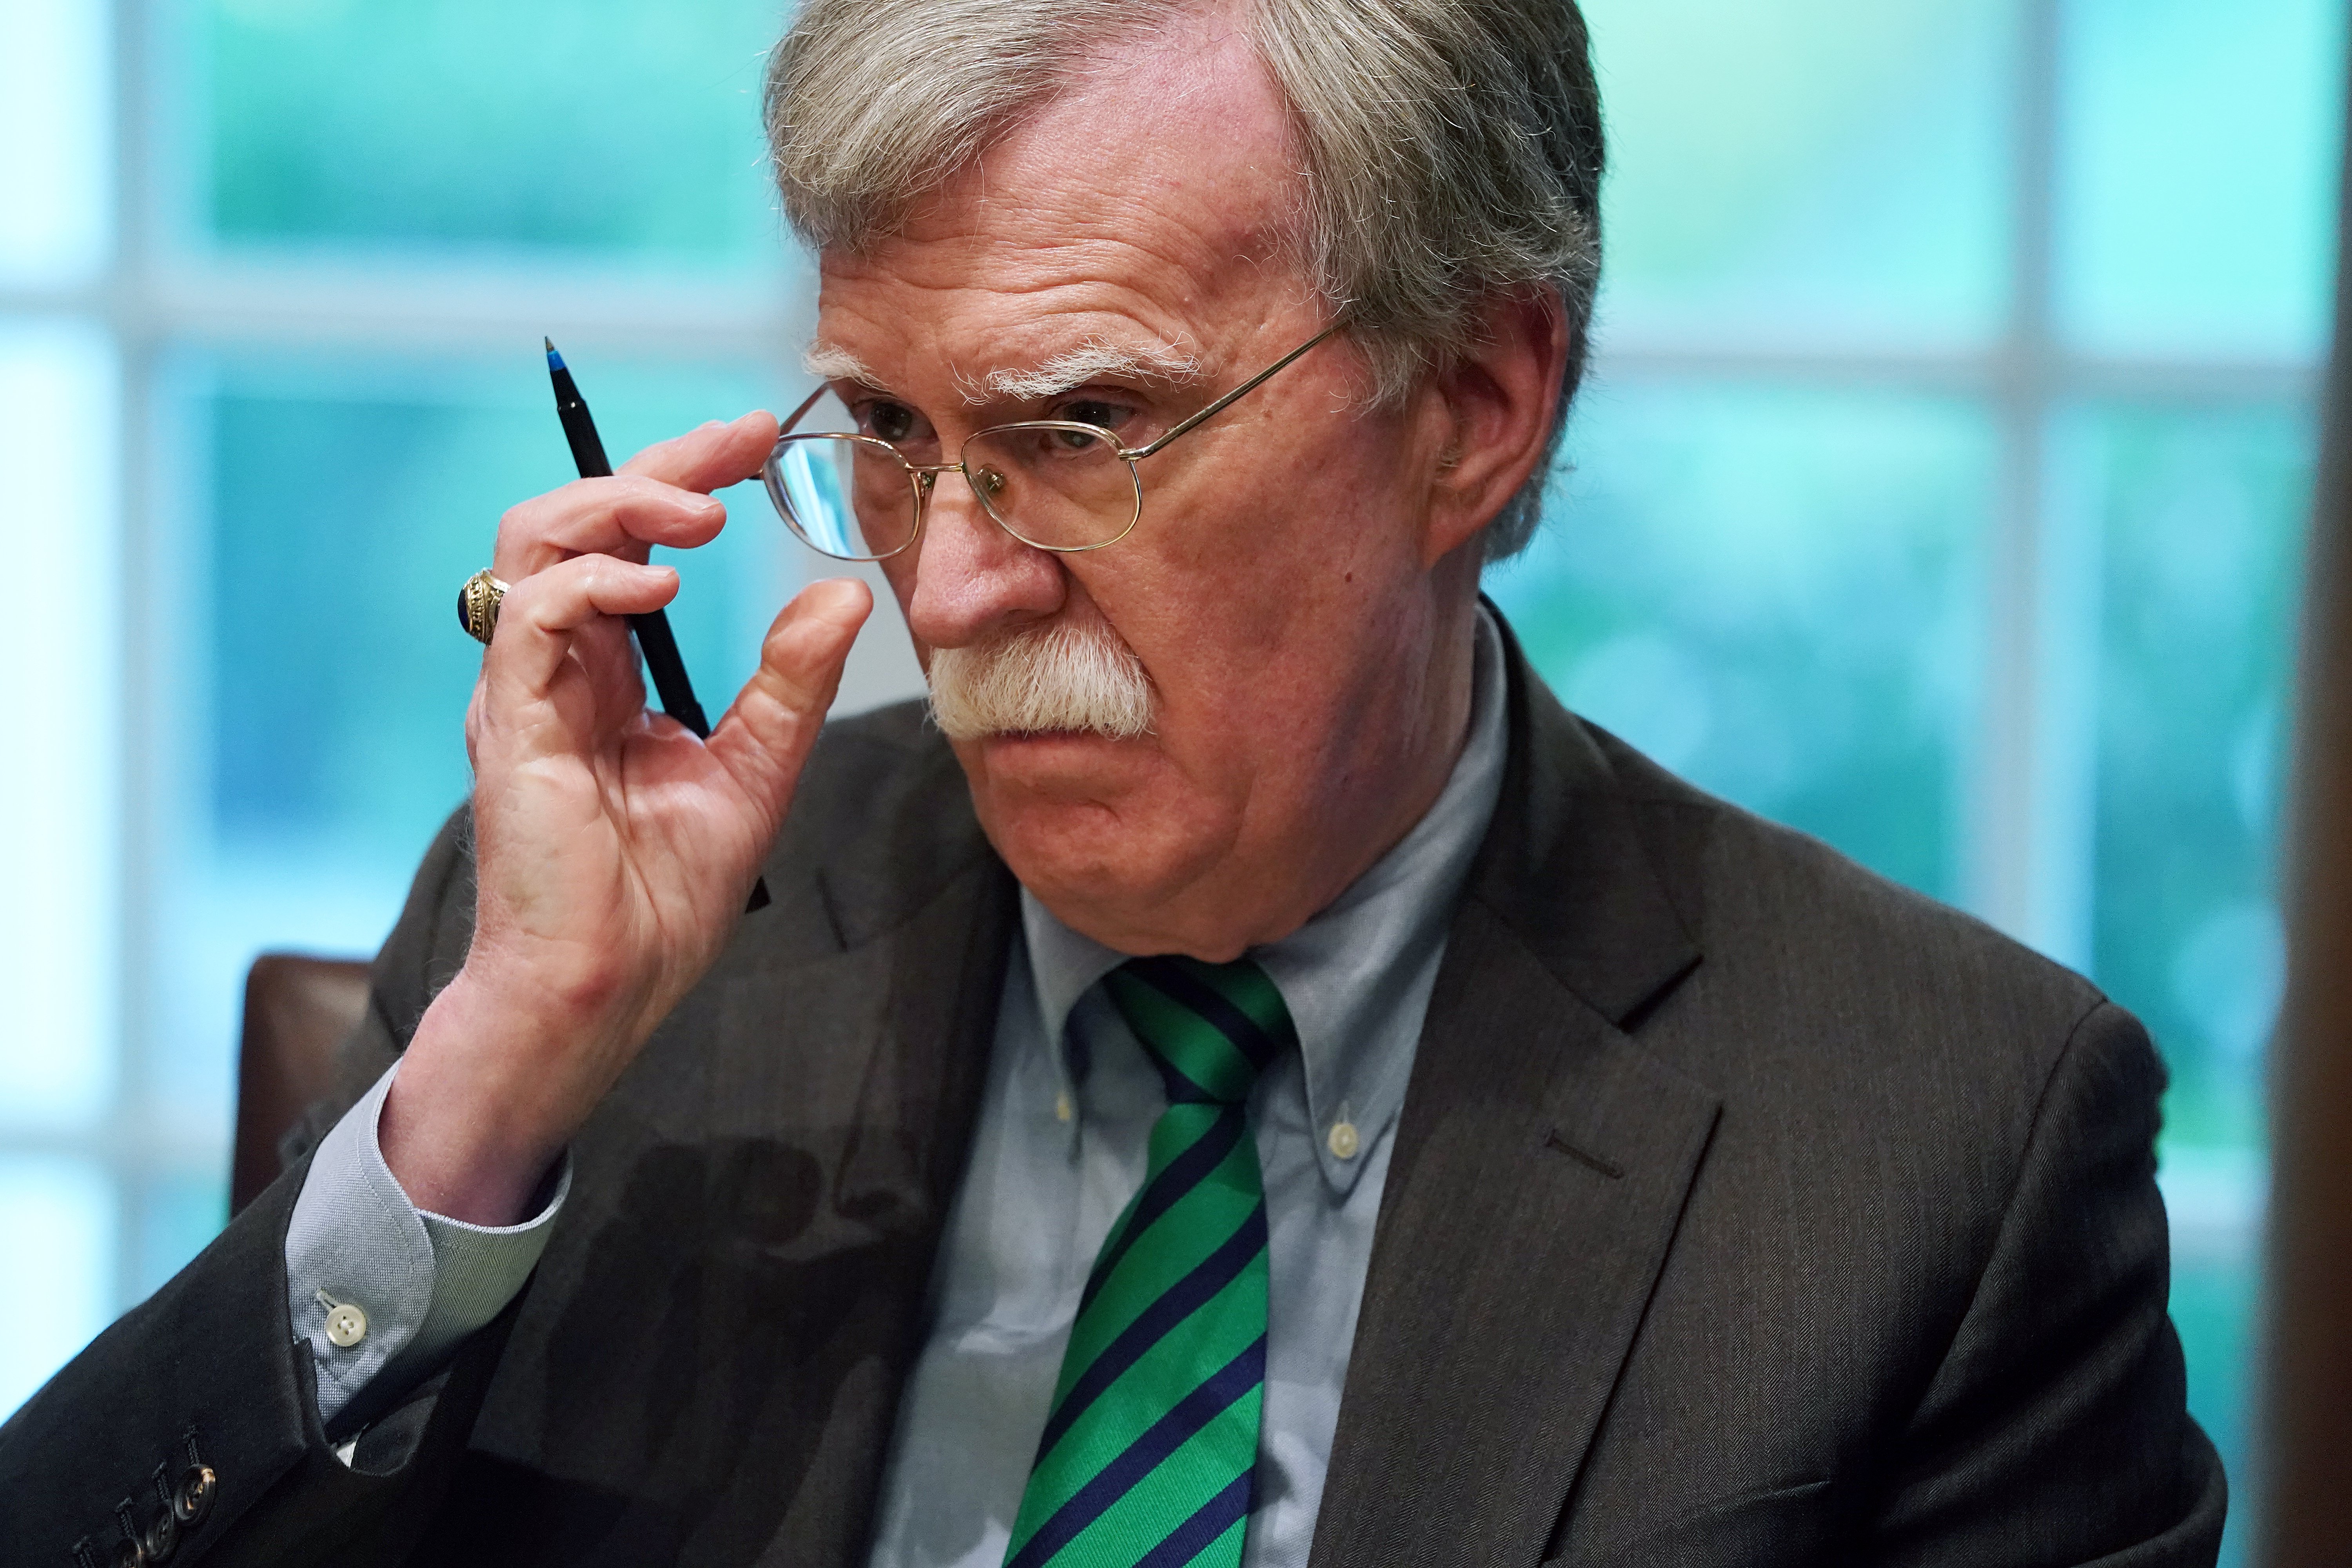 U.S. National Security Advisor John Bolton joins President Donald Trump and NATO Secretary General Jens Stoltenberg during a bilateral meeting in the Cabinet Room at the White House April 02, 2019 in Washington, DC. (Chip Somodevilla/Getty Images)